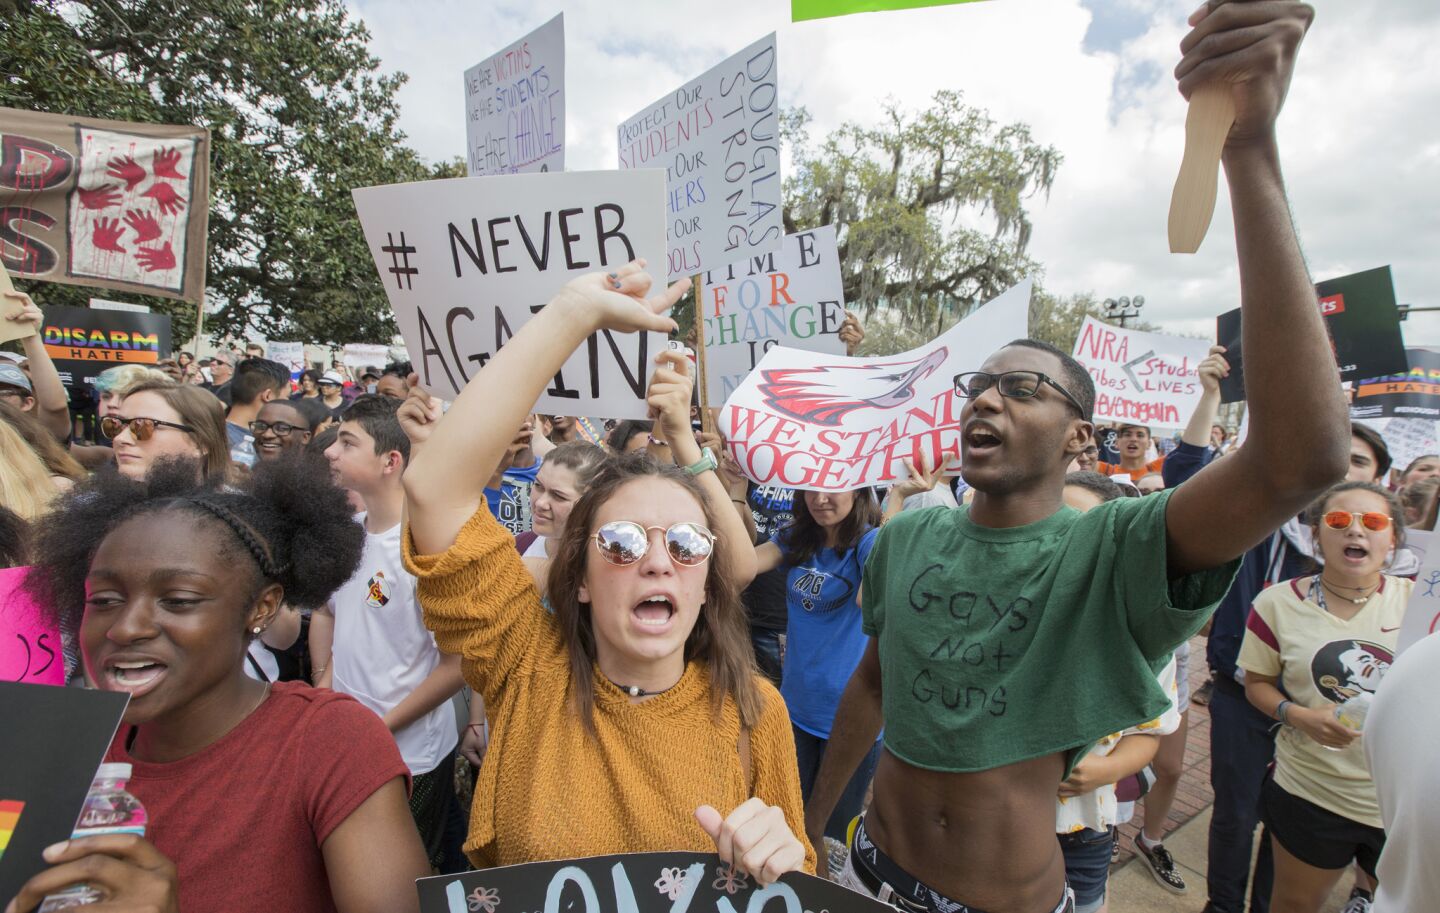 Therese Gachnauer, center, 18, and Kwane Gatlin, right, 19, both high school seniors from Tallahassee, Fla., join fellow students protesting gun violence on the steps of the old Florida Capitol in Tallahassee.